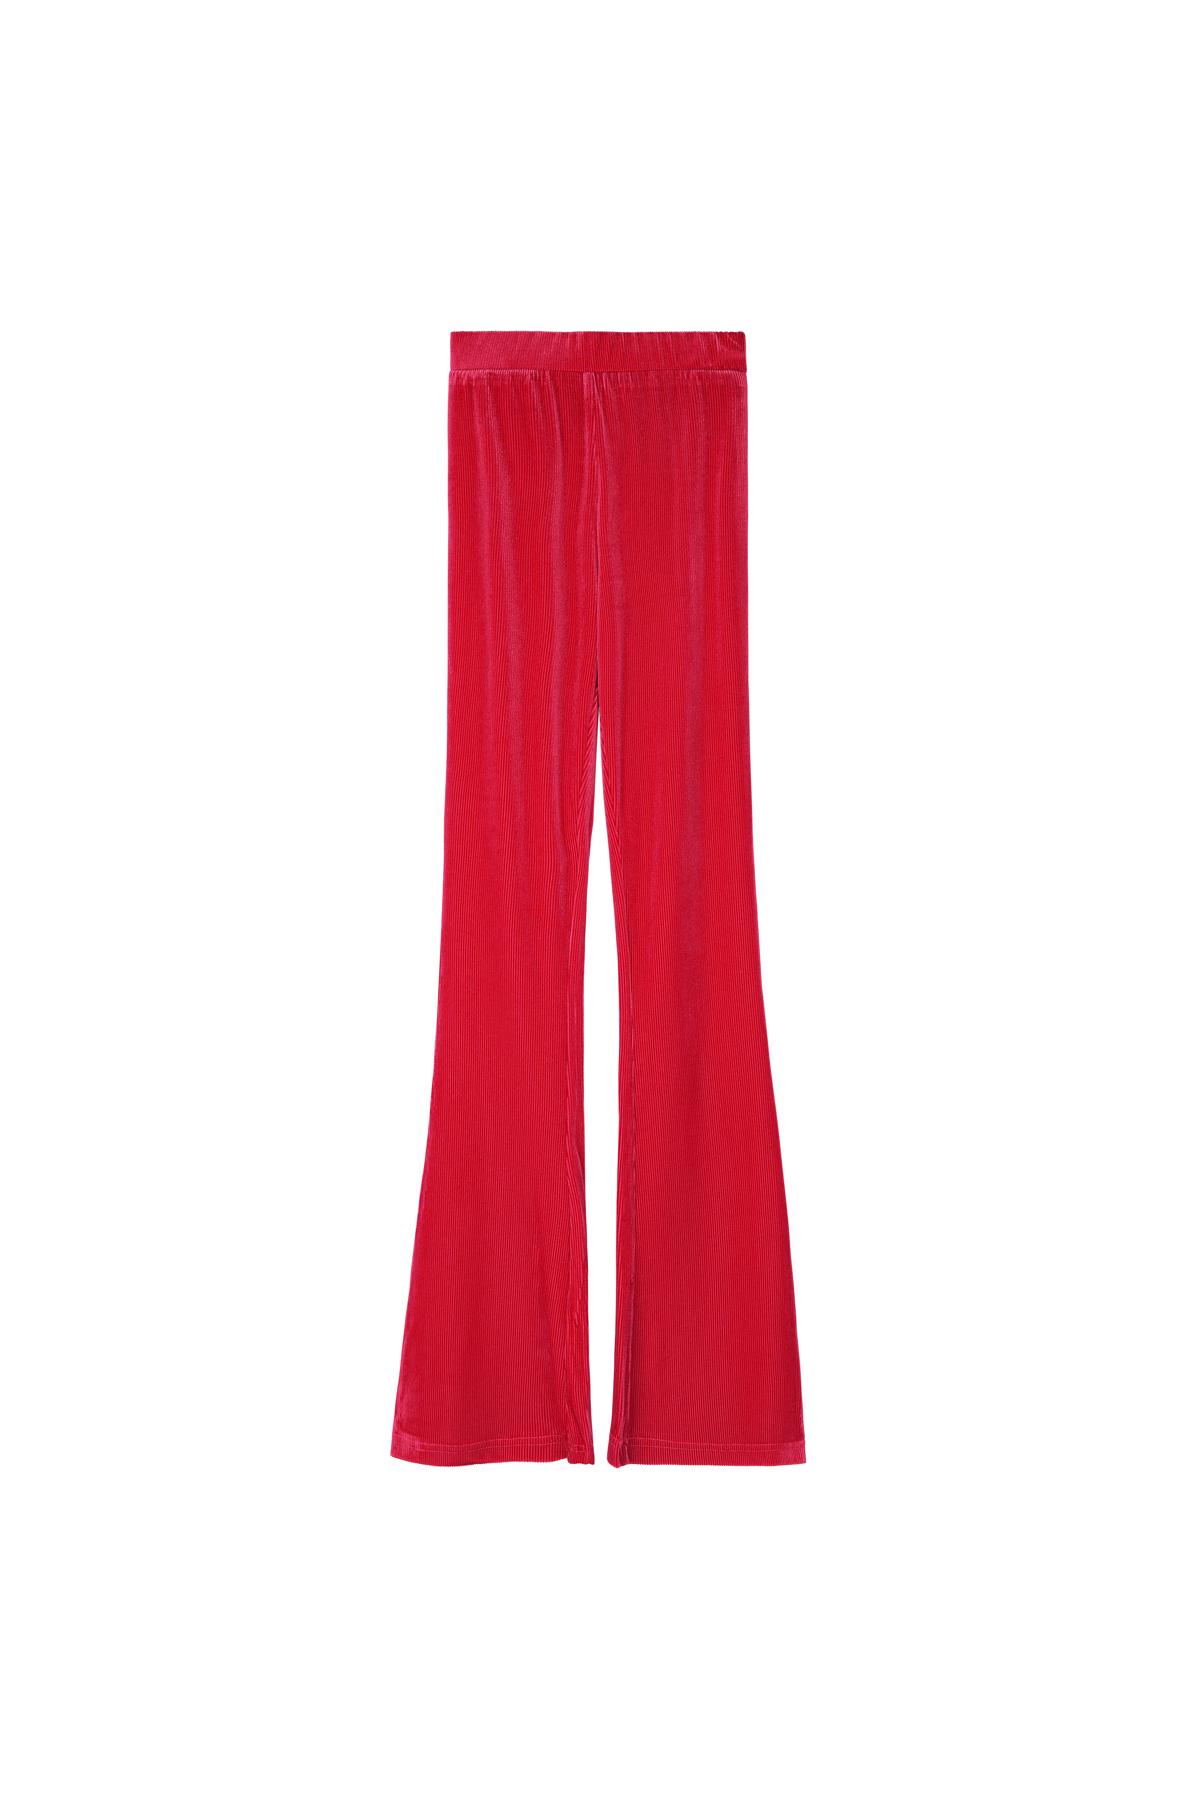 Red / S / Trouser Century Red S 